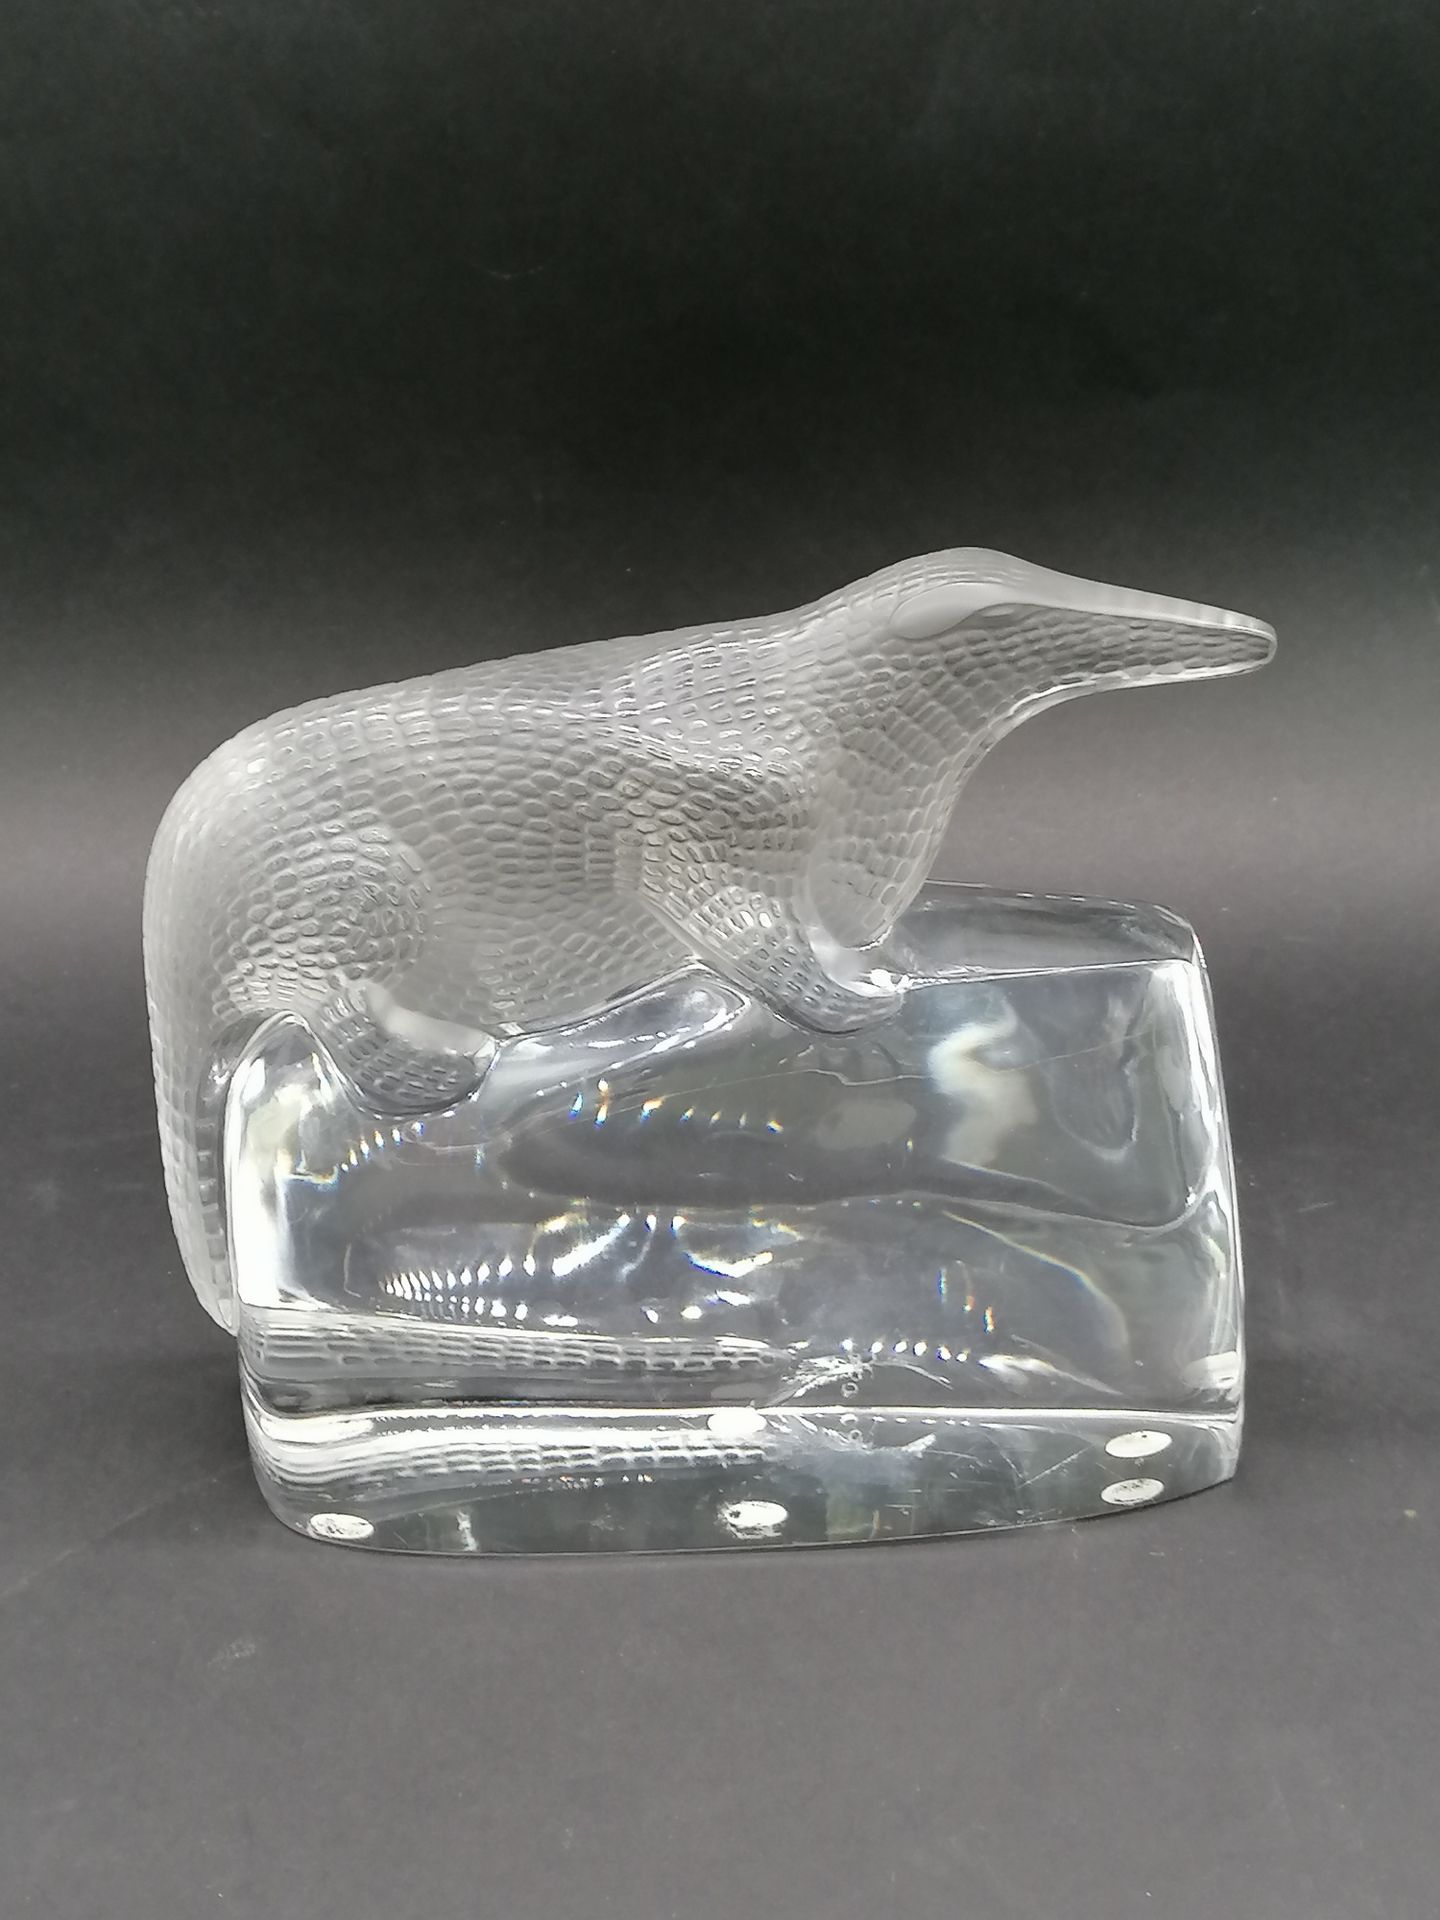 Null LALIQUE FRANCE

Pangolin

Crystal subject 

Signed at the tip

A chip insid&hellip;